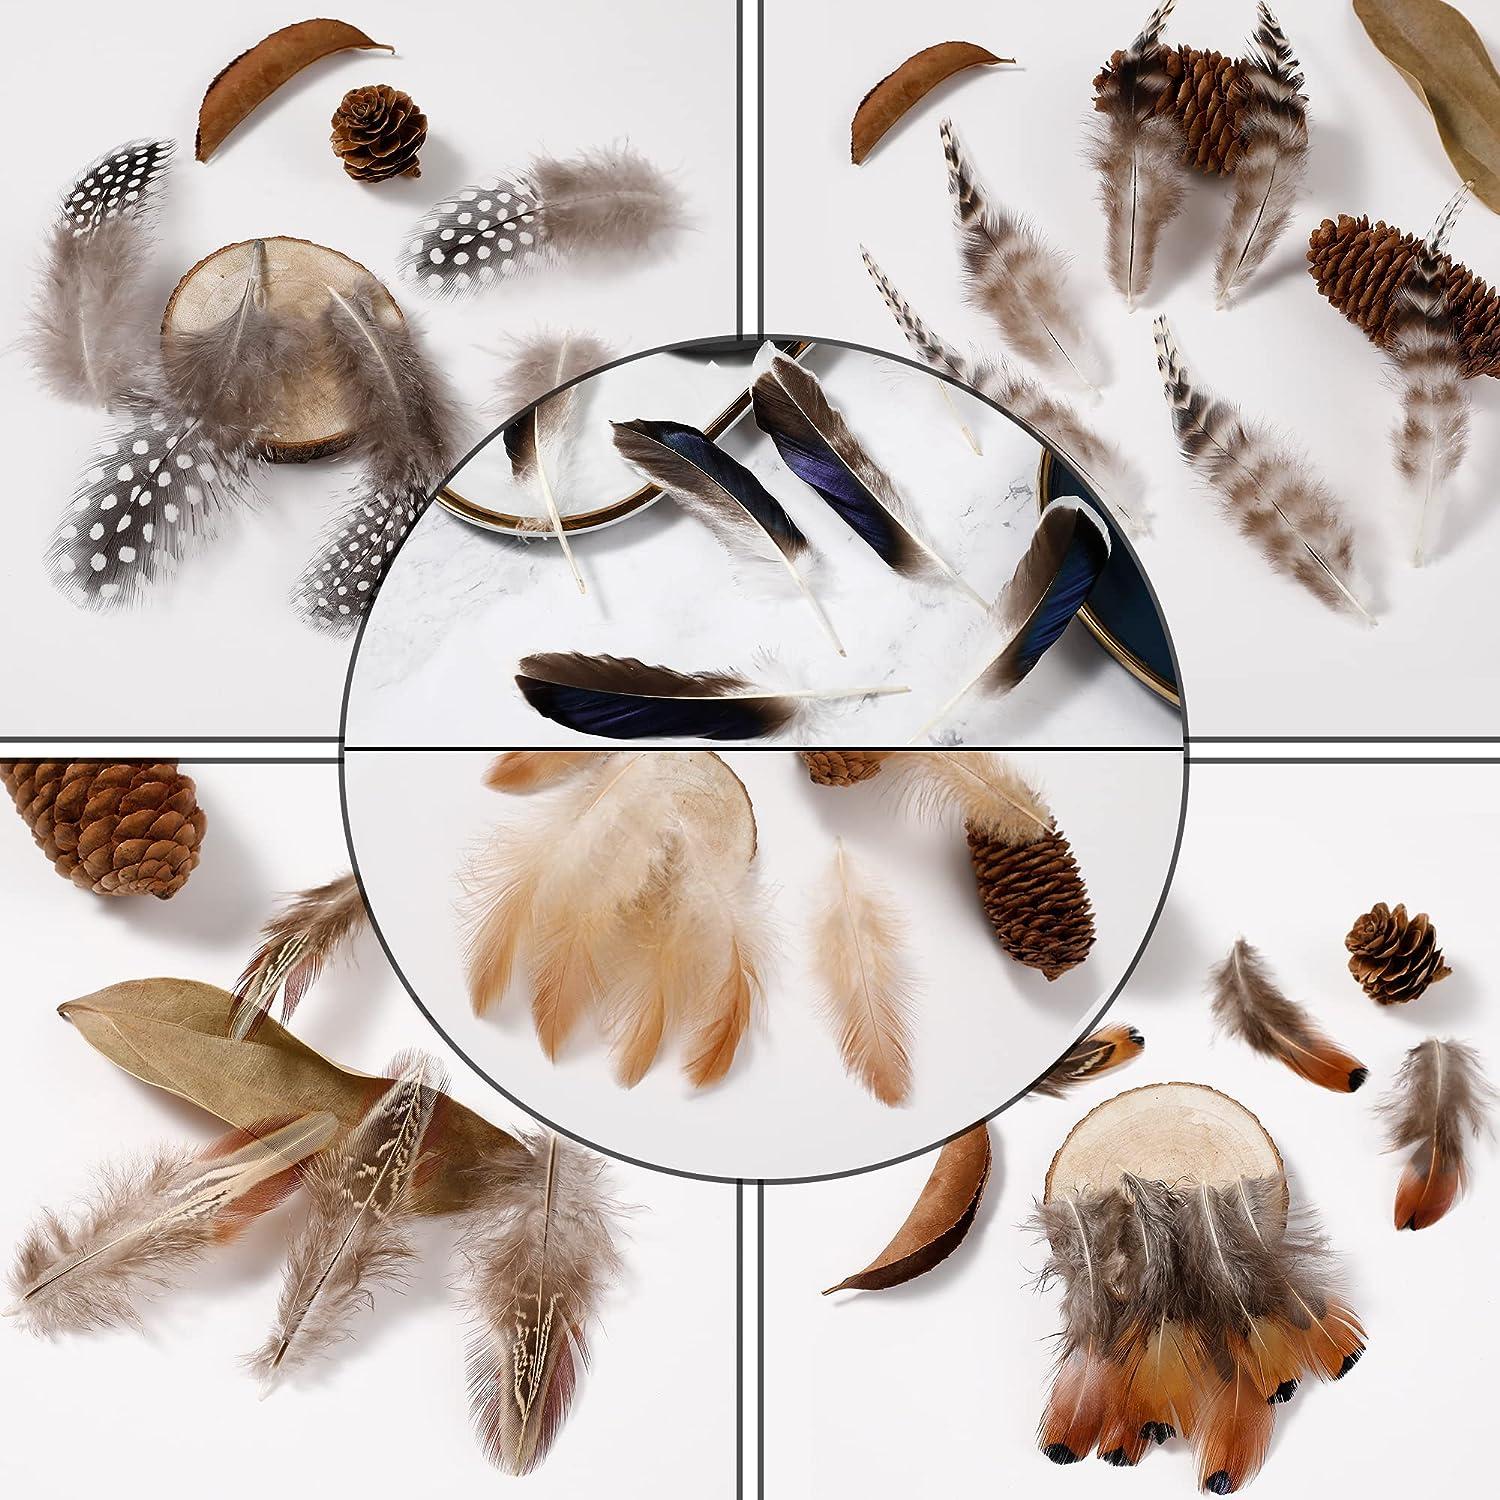  THARAHT 120pcs Mix Colour Two Style Spotted Small Natural Bulk  Feathers 2-3 Inches for for Sewing Crafts Clothing Jewelry Wedding Hair  Hats Dream Catcher Decoration Guinea Fowl Feathers